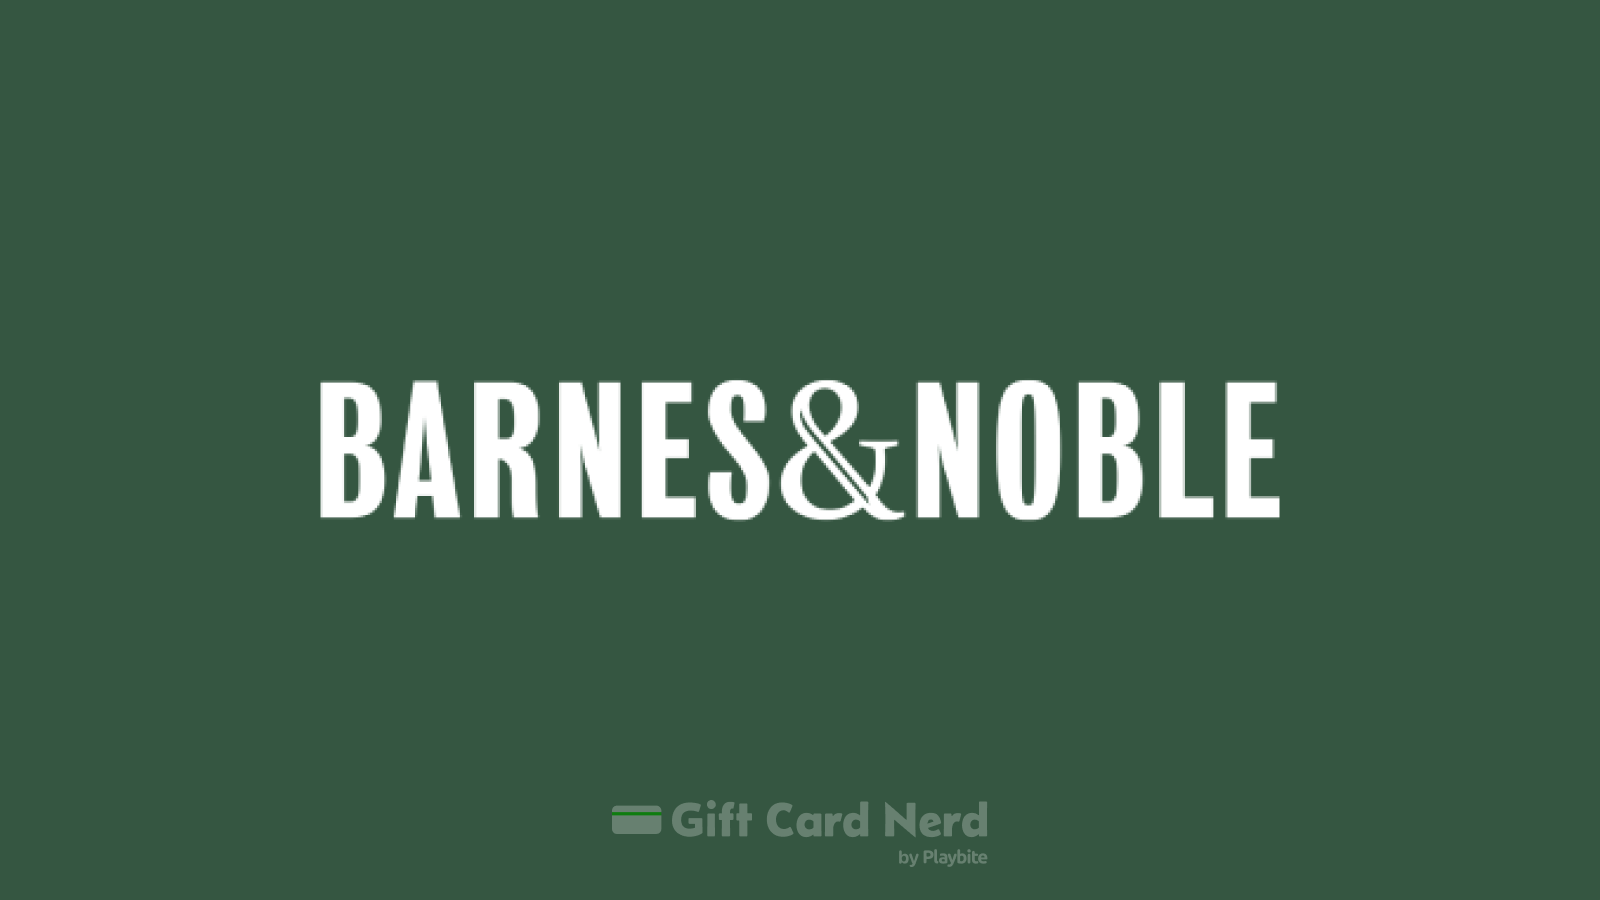 Can I Use a Barnes and Noble Gift Card on Amazon?